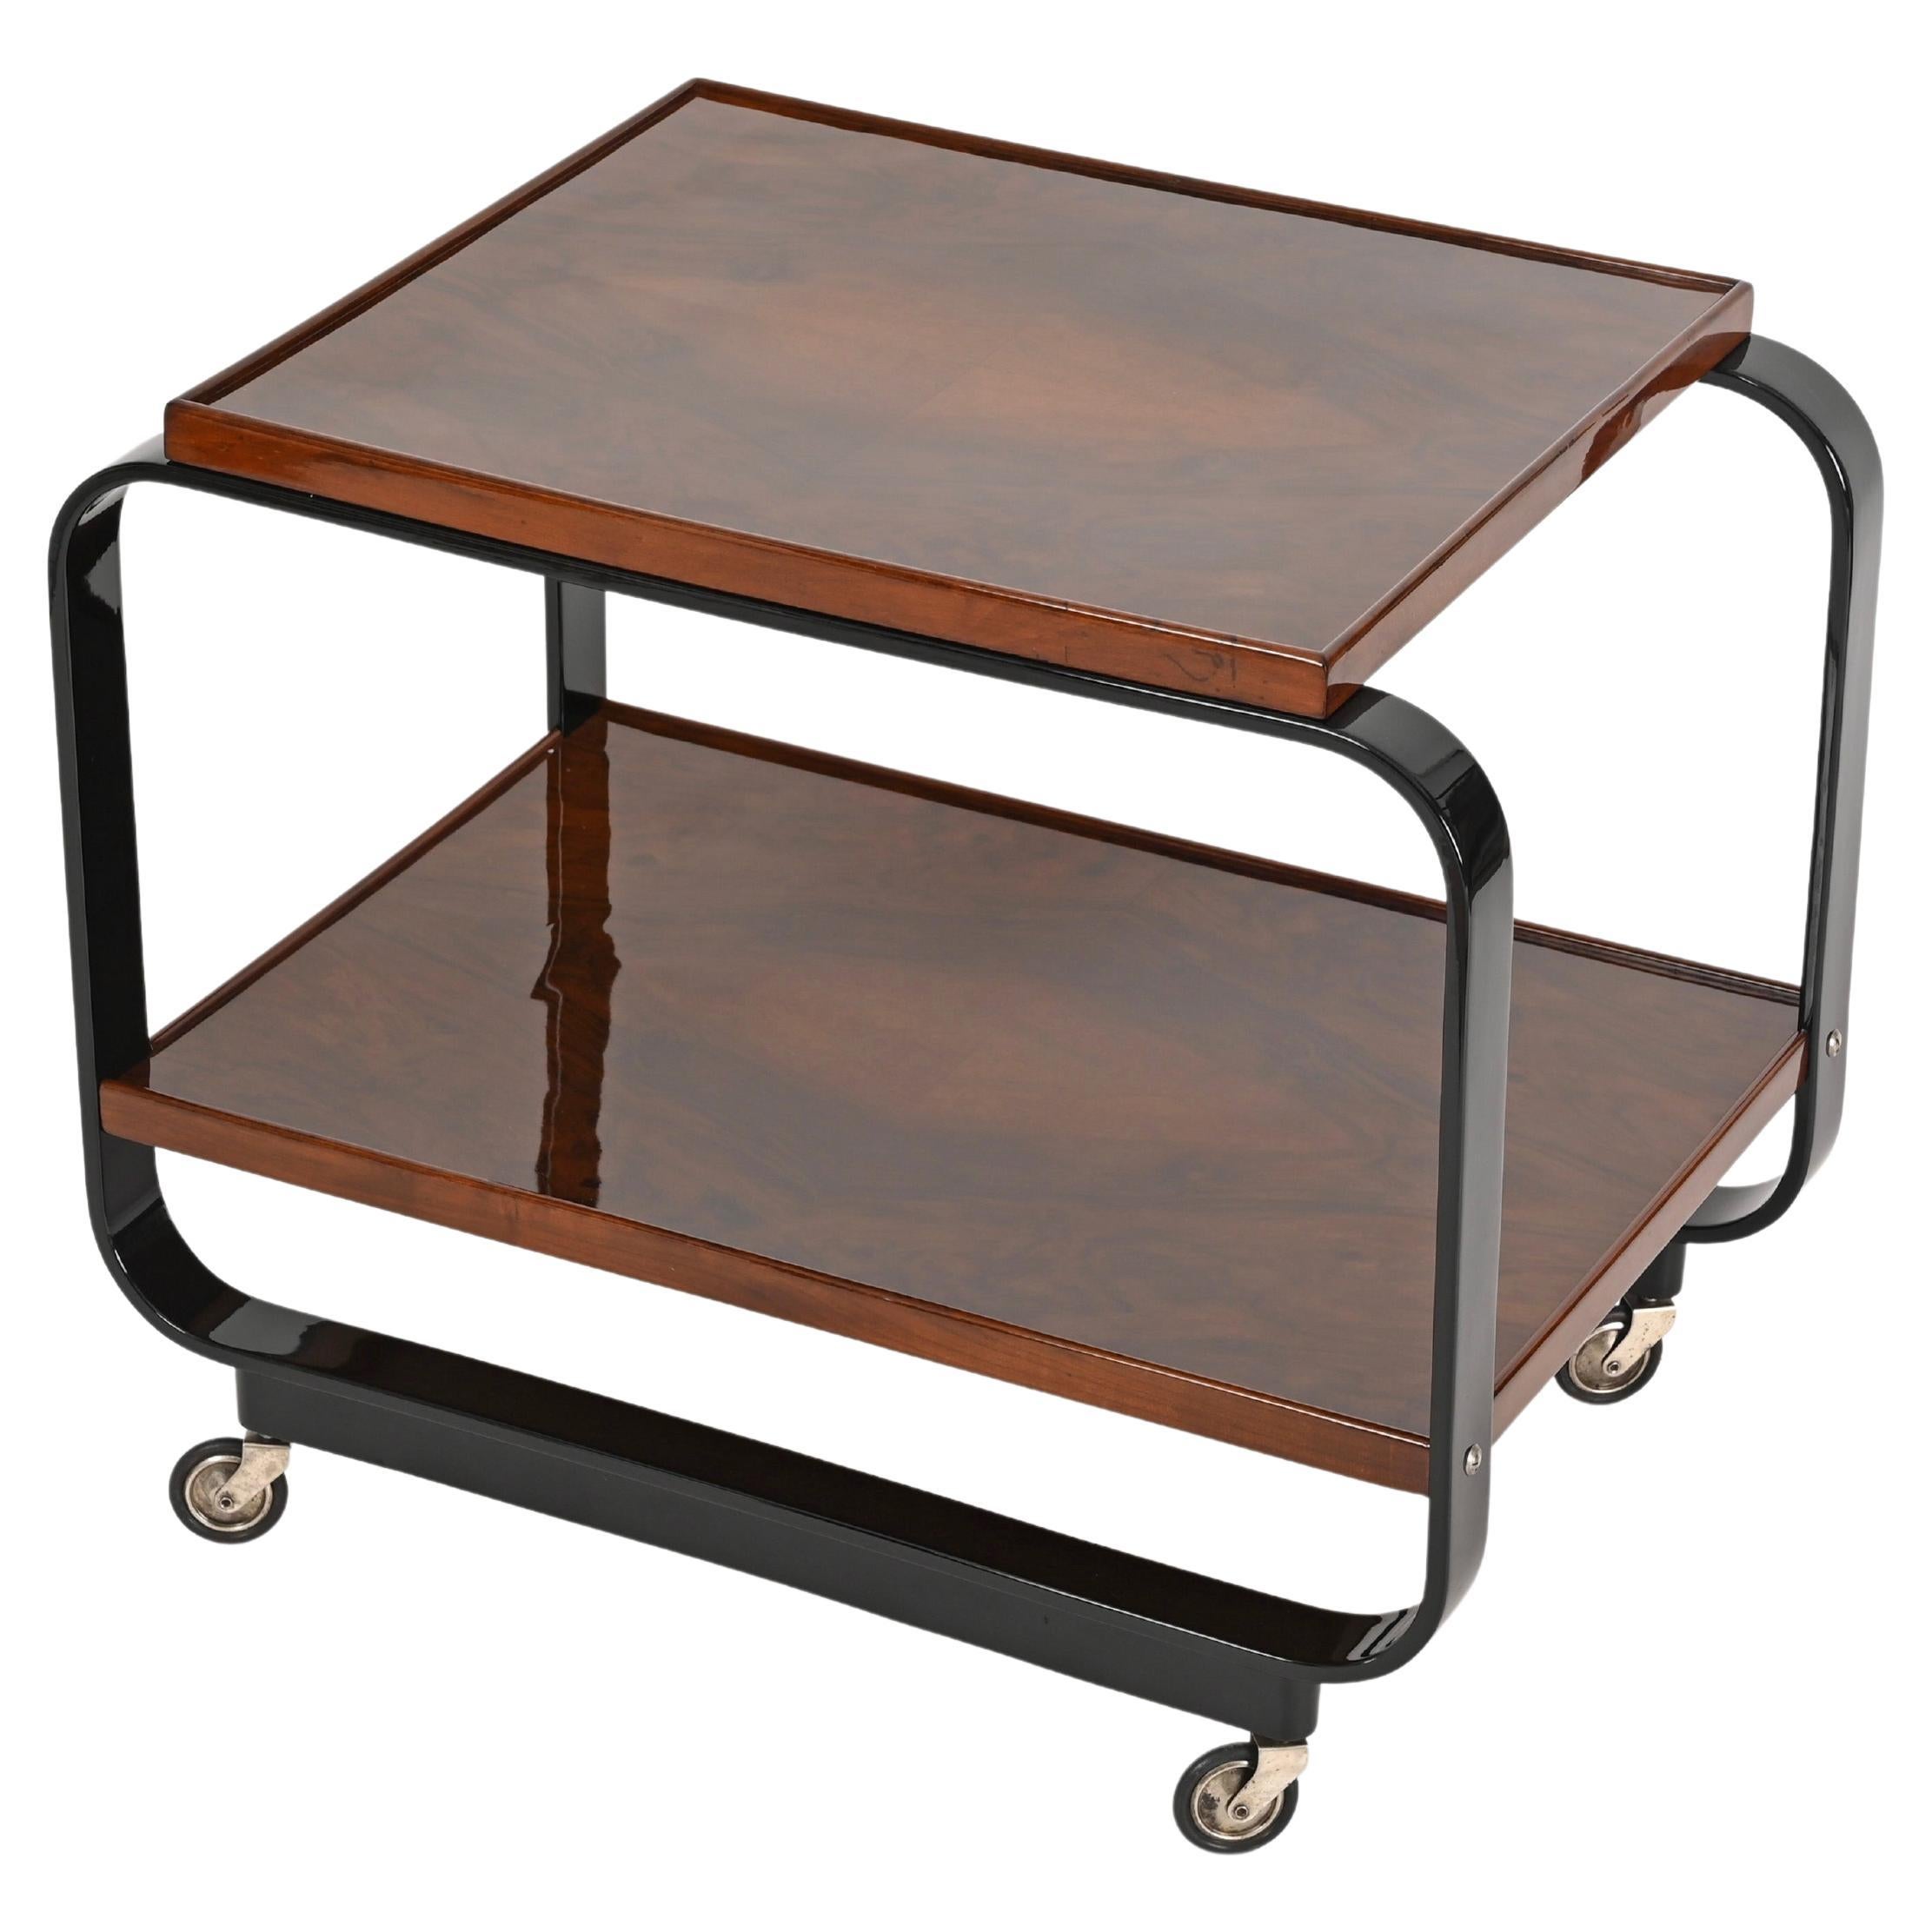 Serving Bar Cart by Gino Maggioni Signed, Bent Curly Walnut Wood, Italy, 1930s For Sale